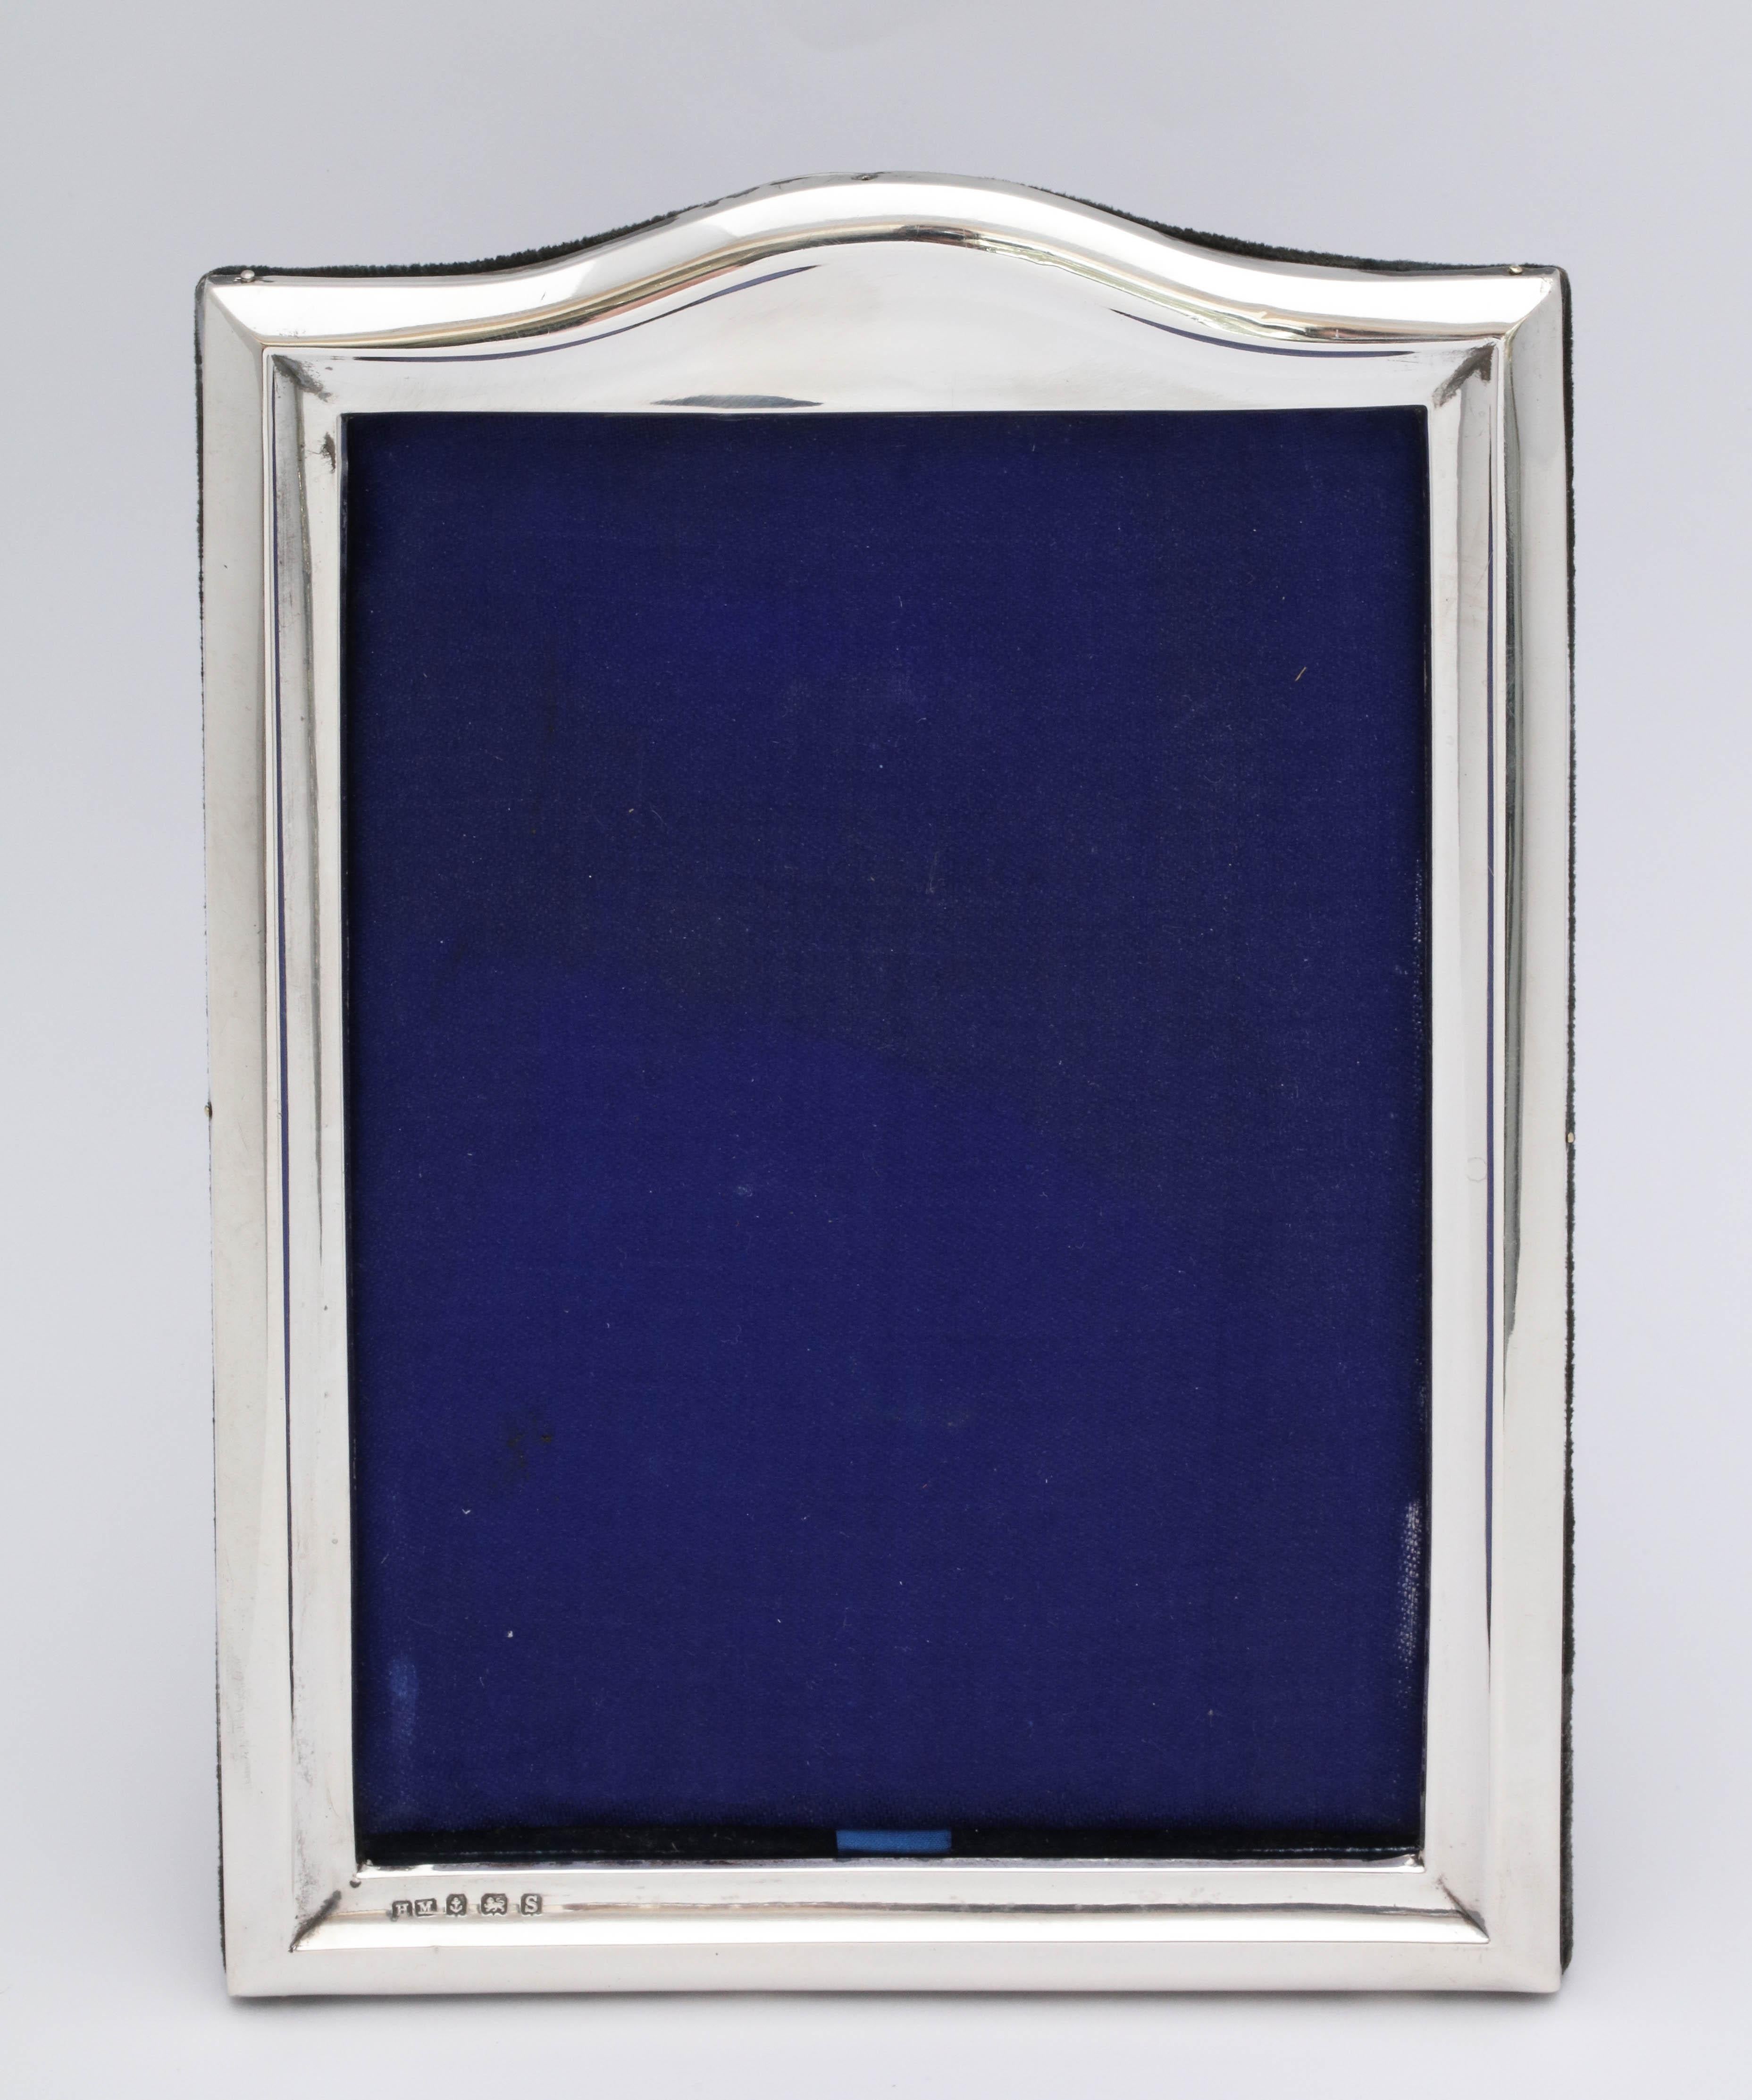 Art Deco, sterling silver, hump-topped picture frame, Birmingham, England, 1917, H. Matthews - maker. Measures 7 inches high (at highest point) x 5 inches wide x 2 1/2 inches deep when easel is fully open. Shows a 4 1/2 inch x 5 1/2 inch photo. Very